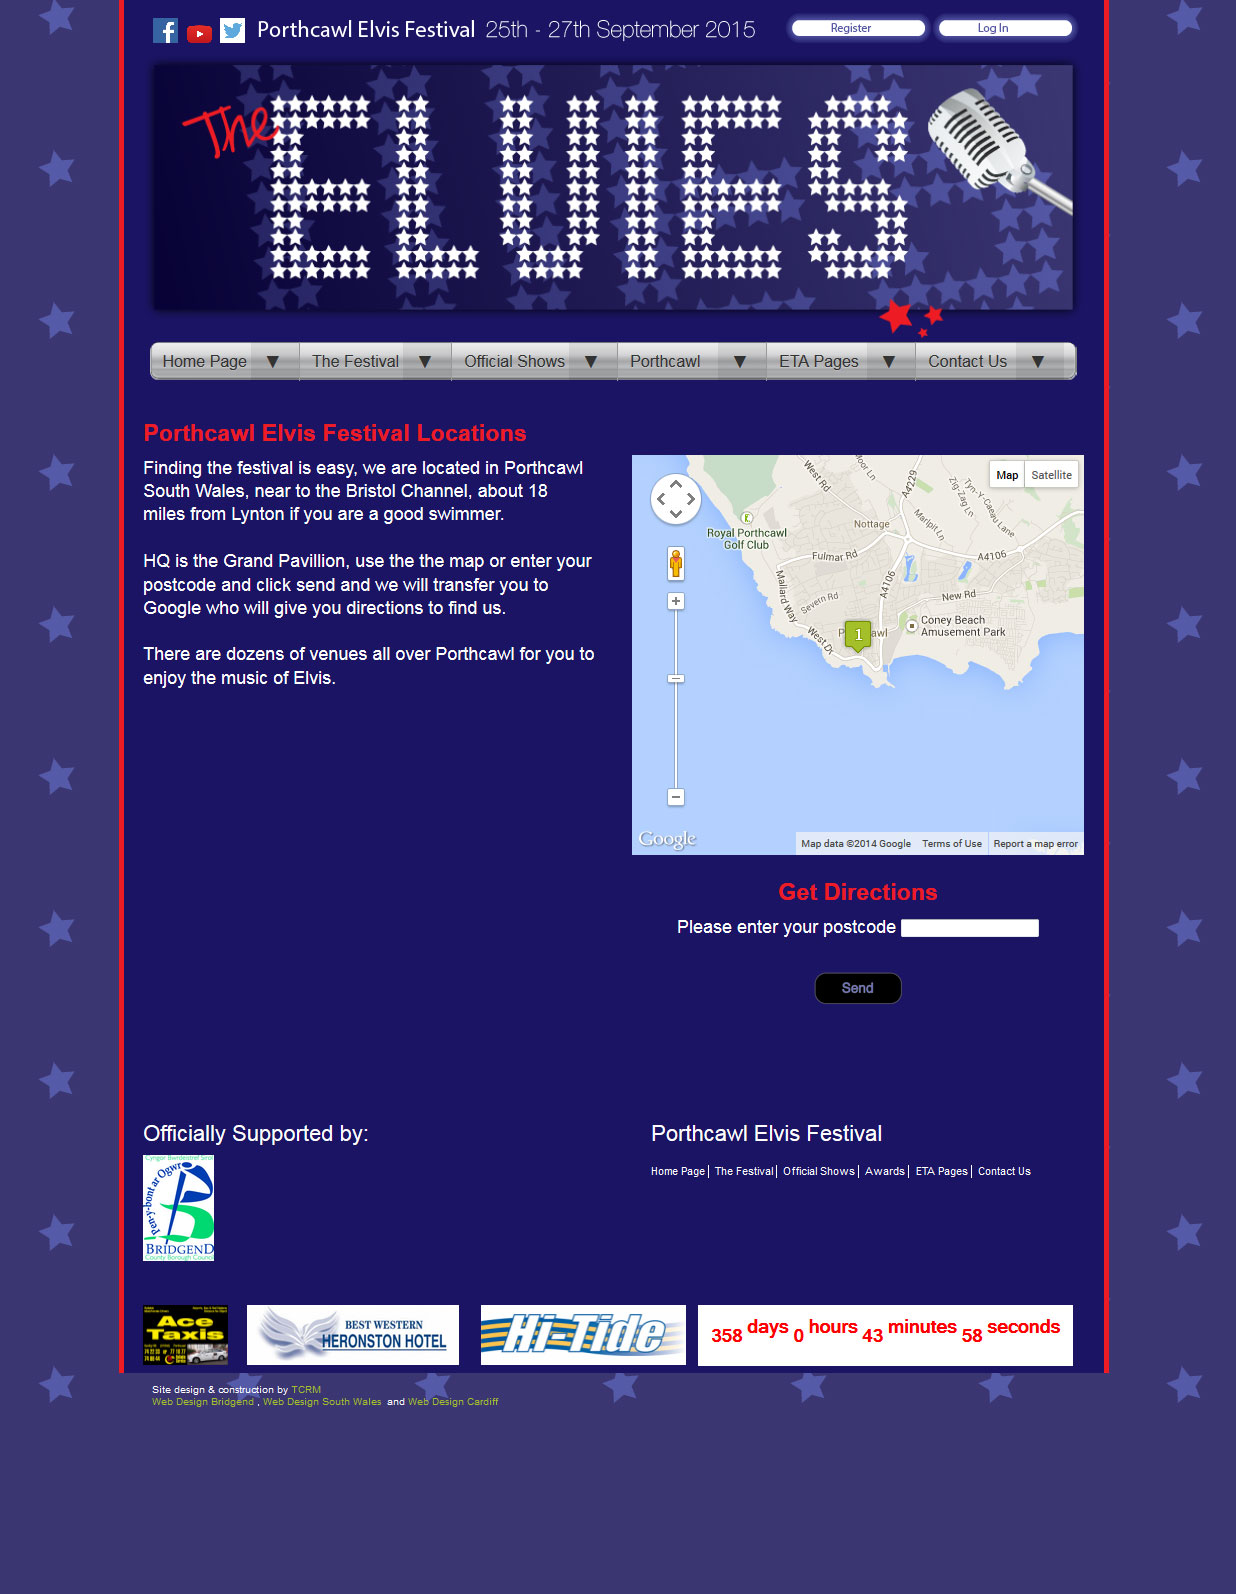 An image from the Elvies web site